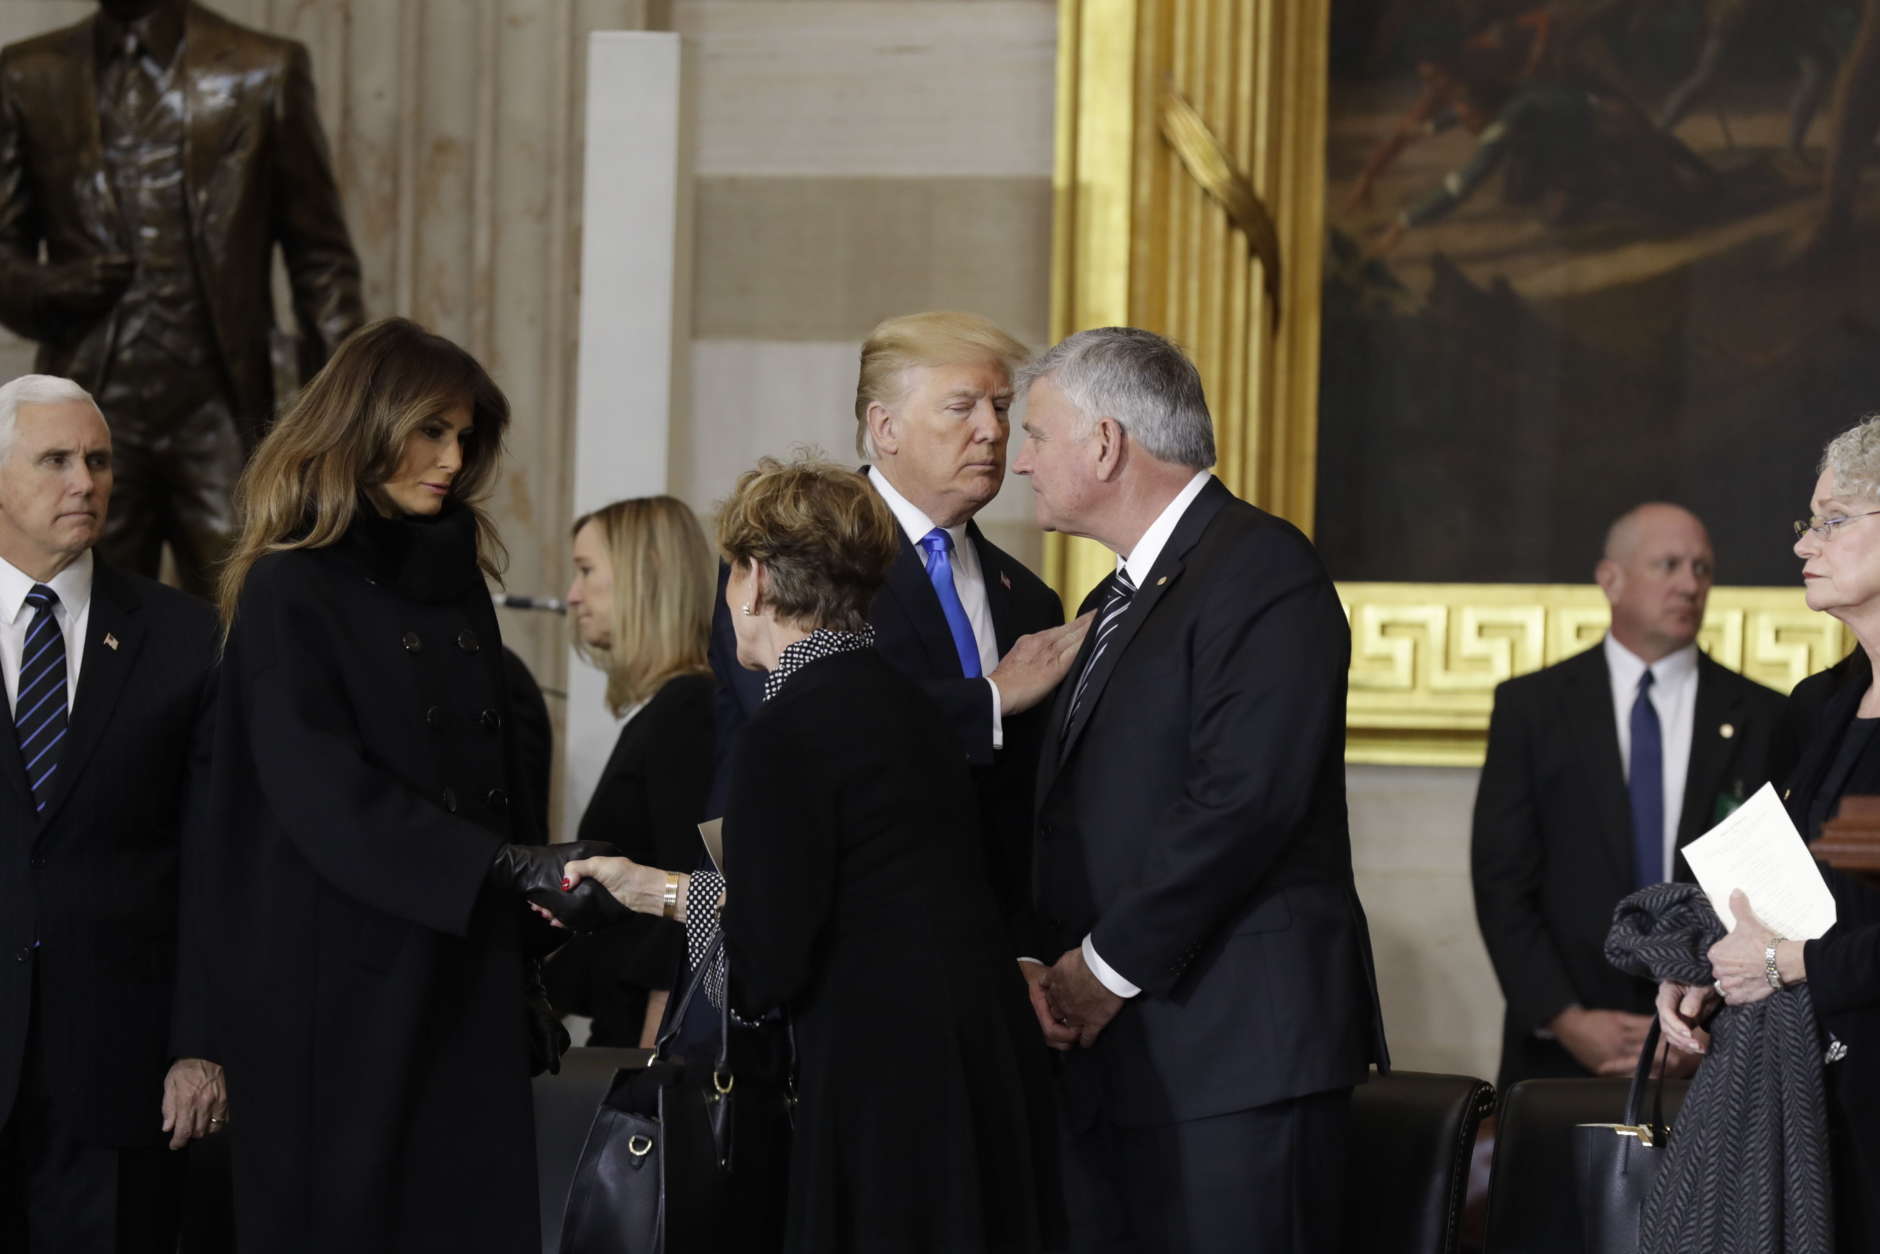 President Donald Trump, center, greets Franklin Graham, as he arrives for the ceremony honoring his father, the Reverend Billy Graham, in the Rotunda of the U.S. Capitol building, Wednesday, Feb. 28, in Washington. (AP Photo/Evan Vucci)